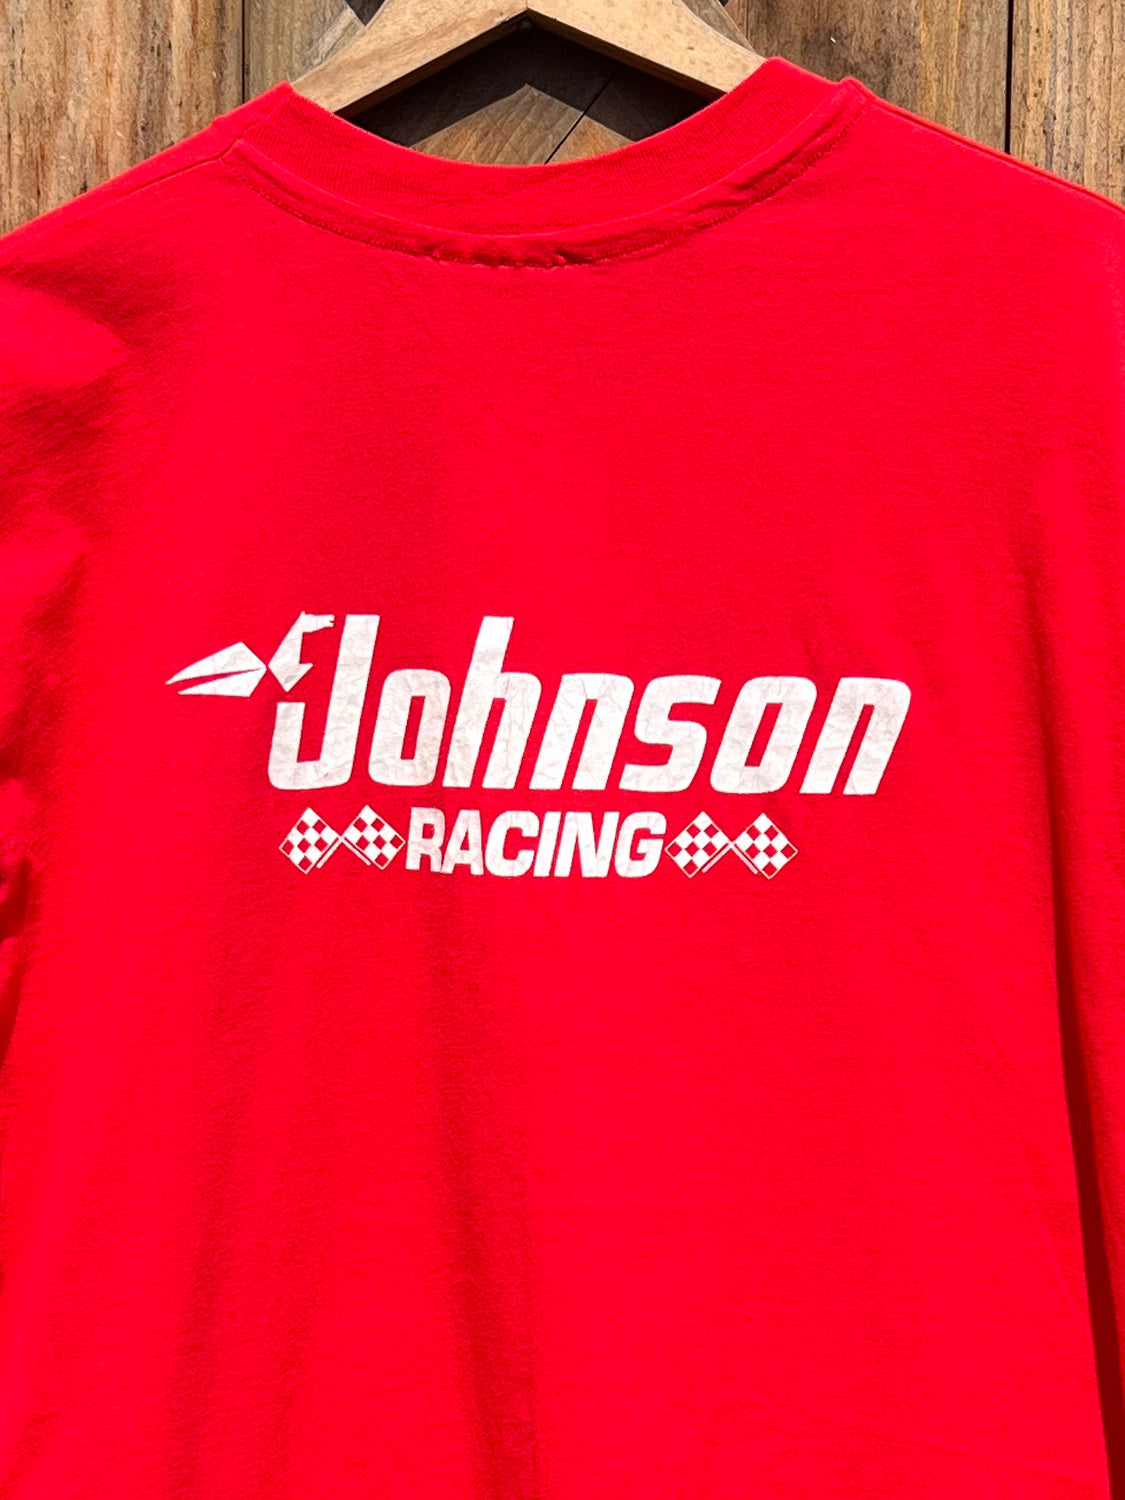 Johnson Outboards Tee - 1990s